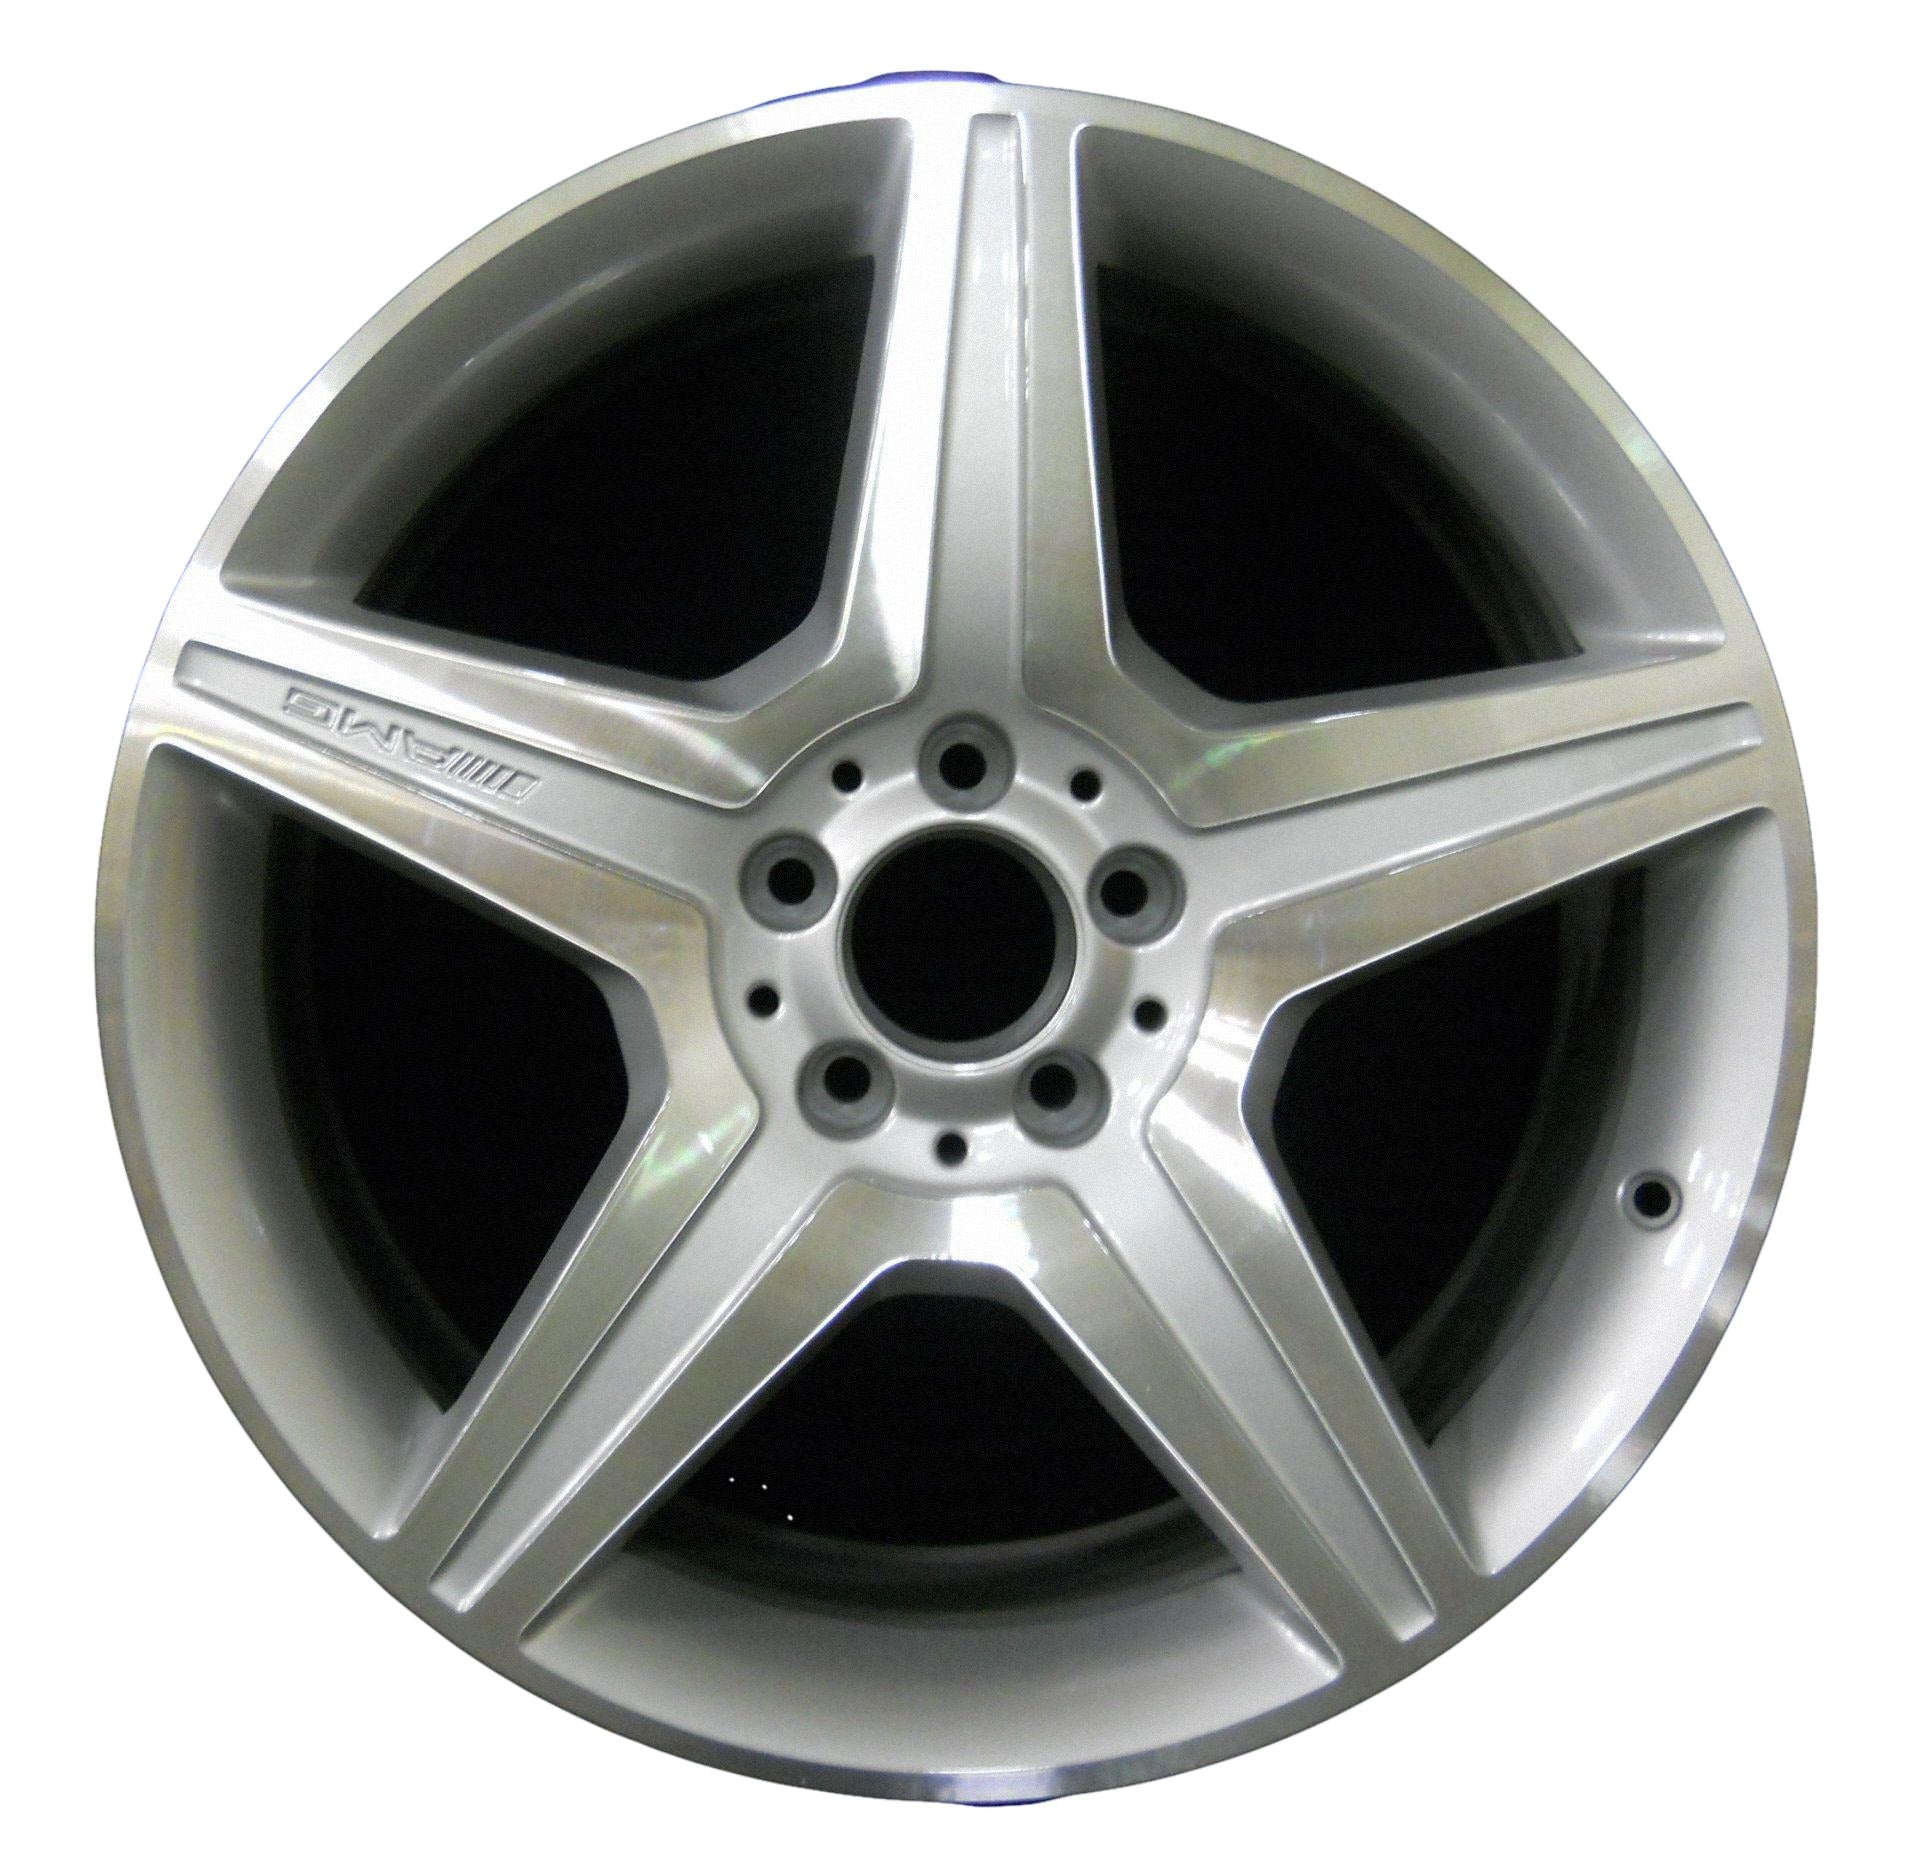 Mercedes S550  2010, 2011 Factory OEM Car Wheel Size 19x8.5 Alloy WAO.85102FT.PS07.MA